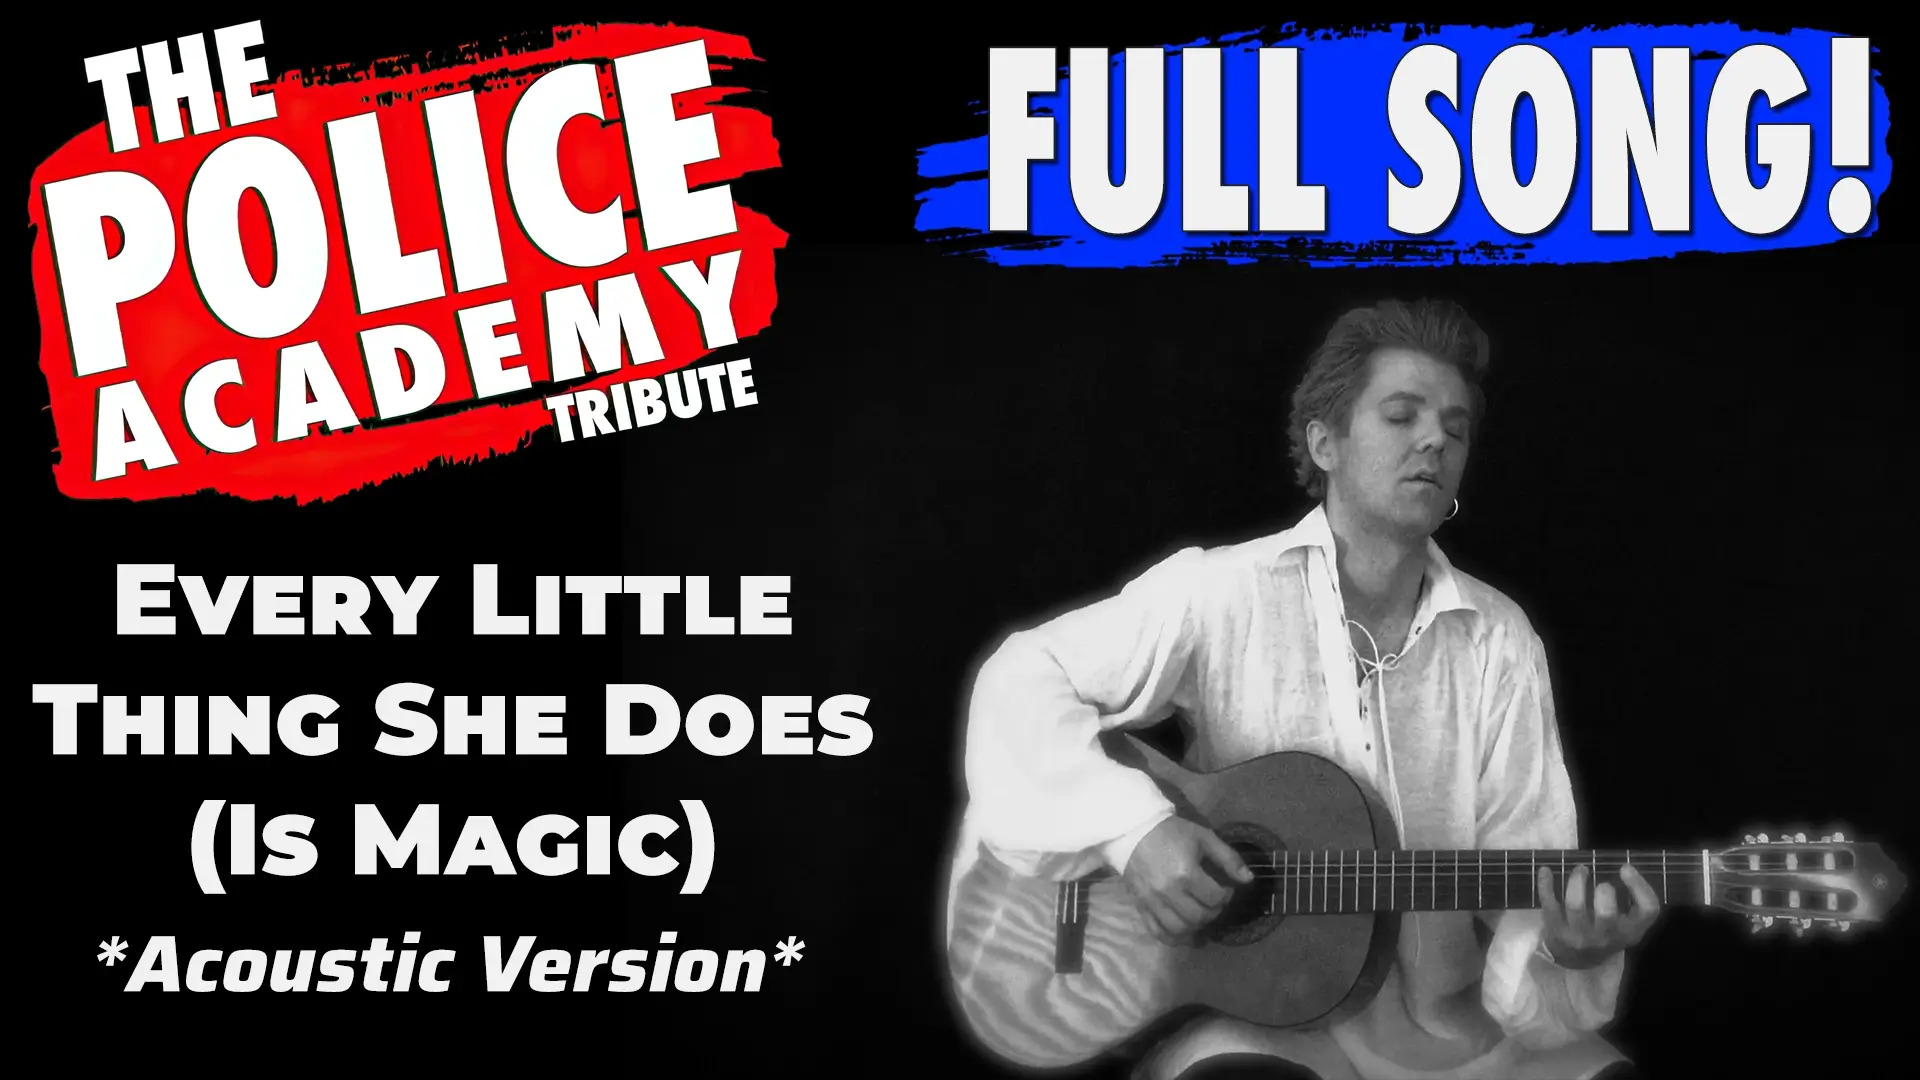 "Every Little Thing She Does is Magic" Acoustic Version - The Police Academy Tribute